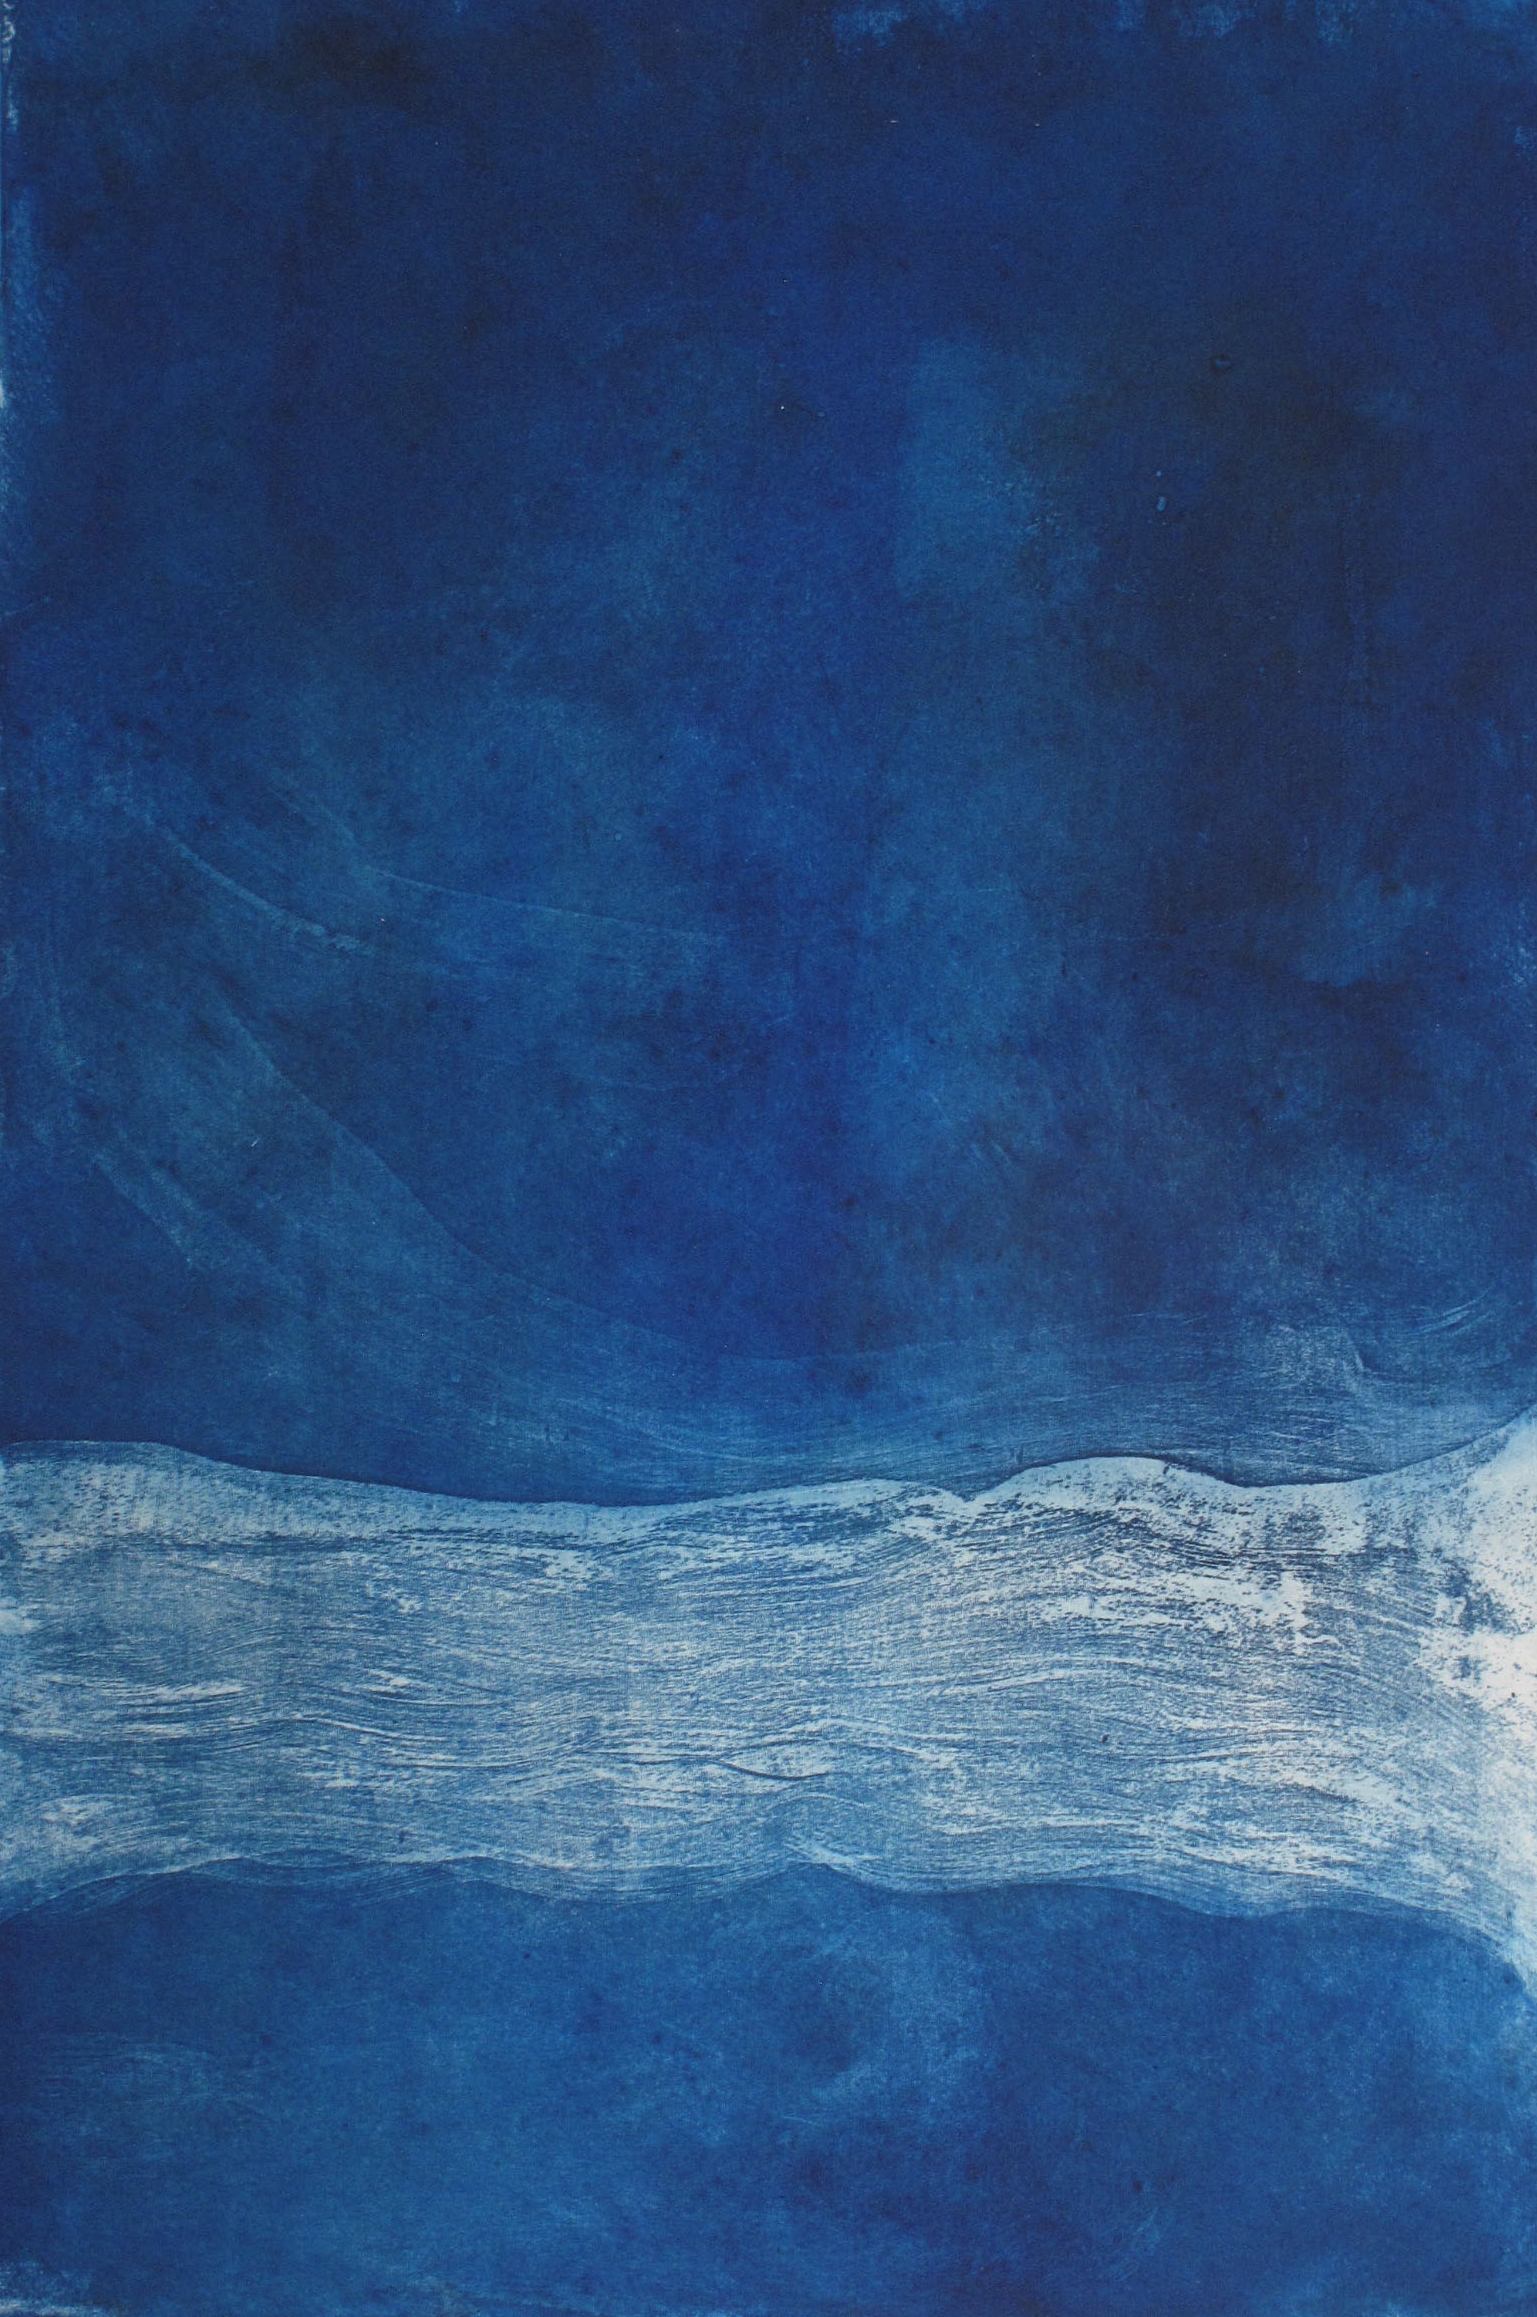   Blue Suite III  Etching by Gina McDonald 